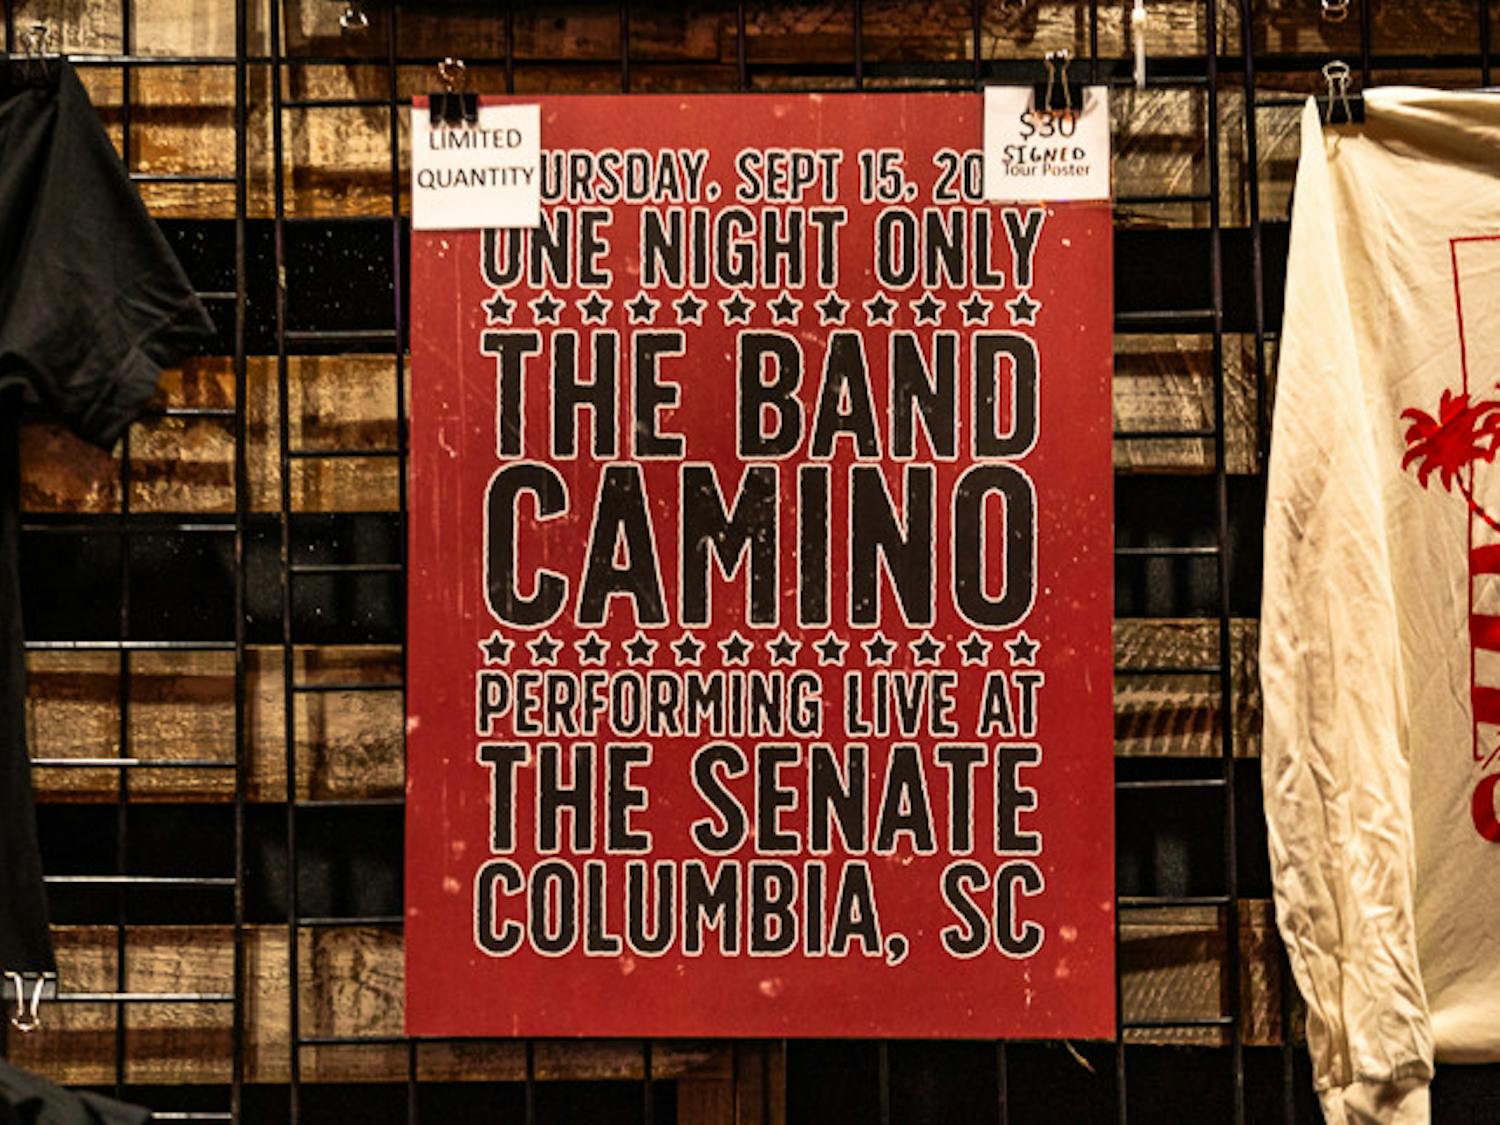 Band poster for The Band CAMINO at The Senate in Columbia, SC on Sept. 15, 2022. The band last performed in Columbia on Aug. 26, 2018 at New Brooklyn Tavern.